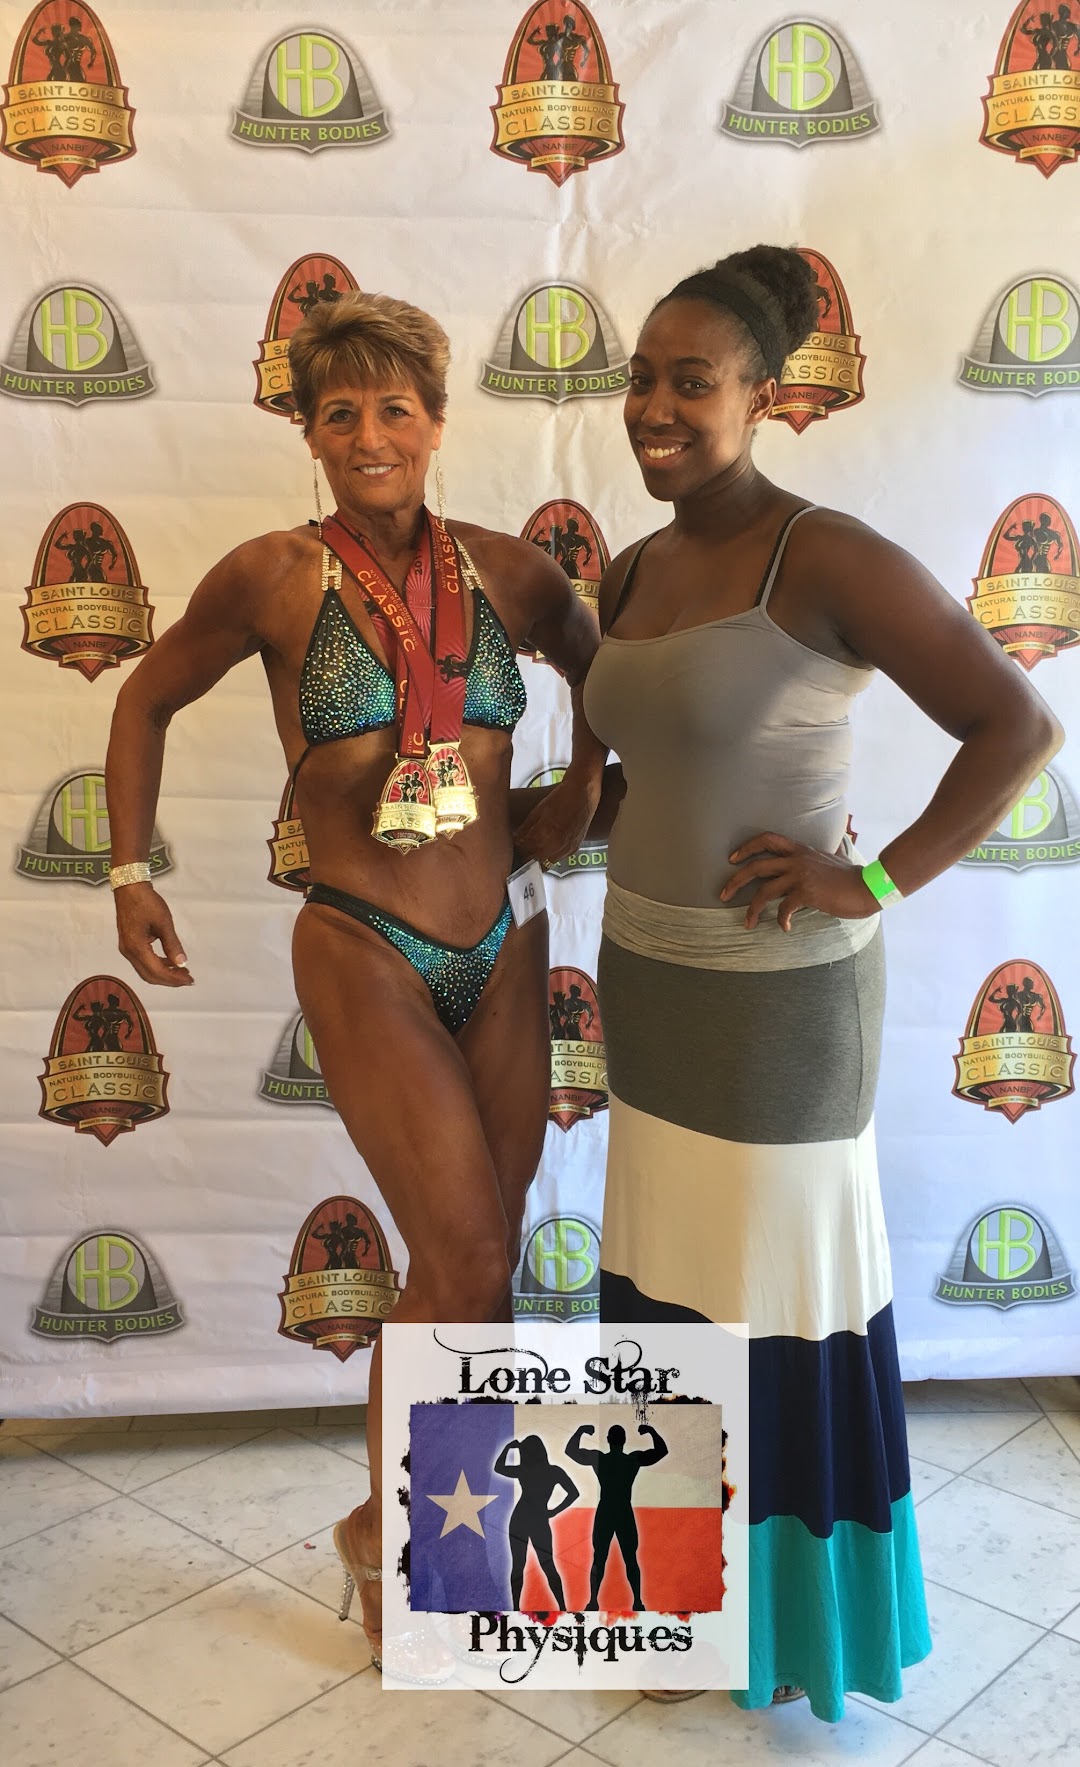 Lone Star Physiques